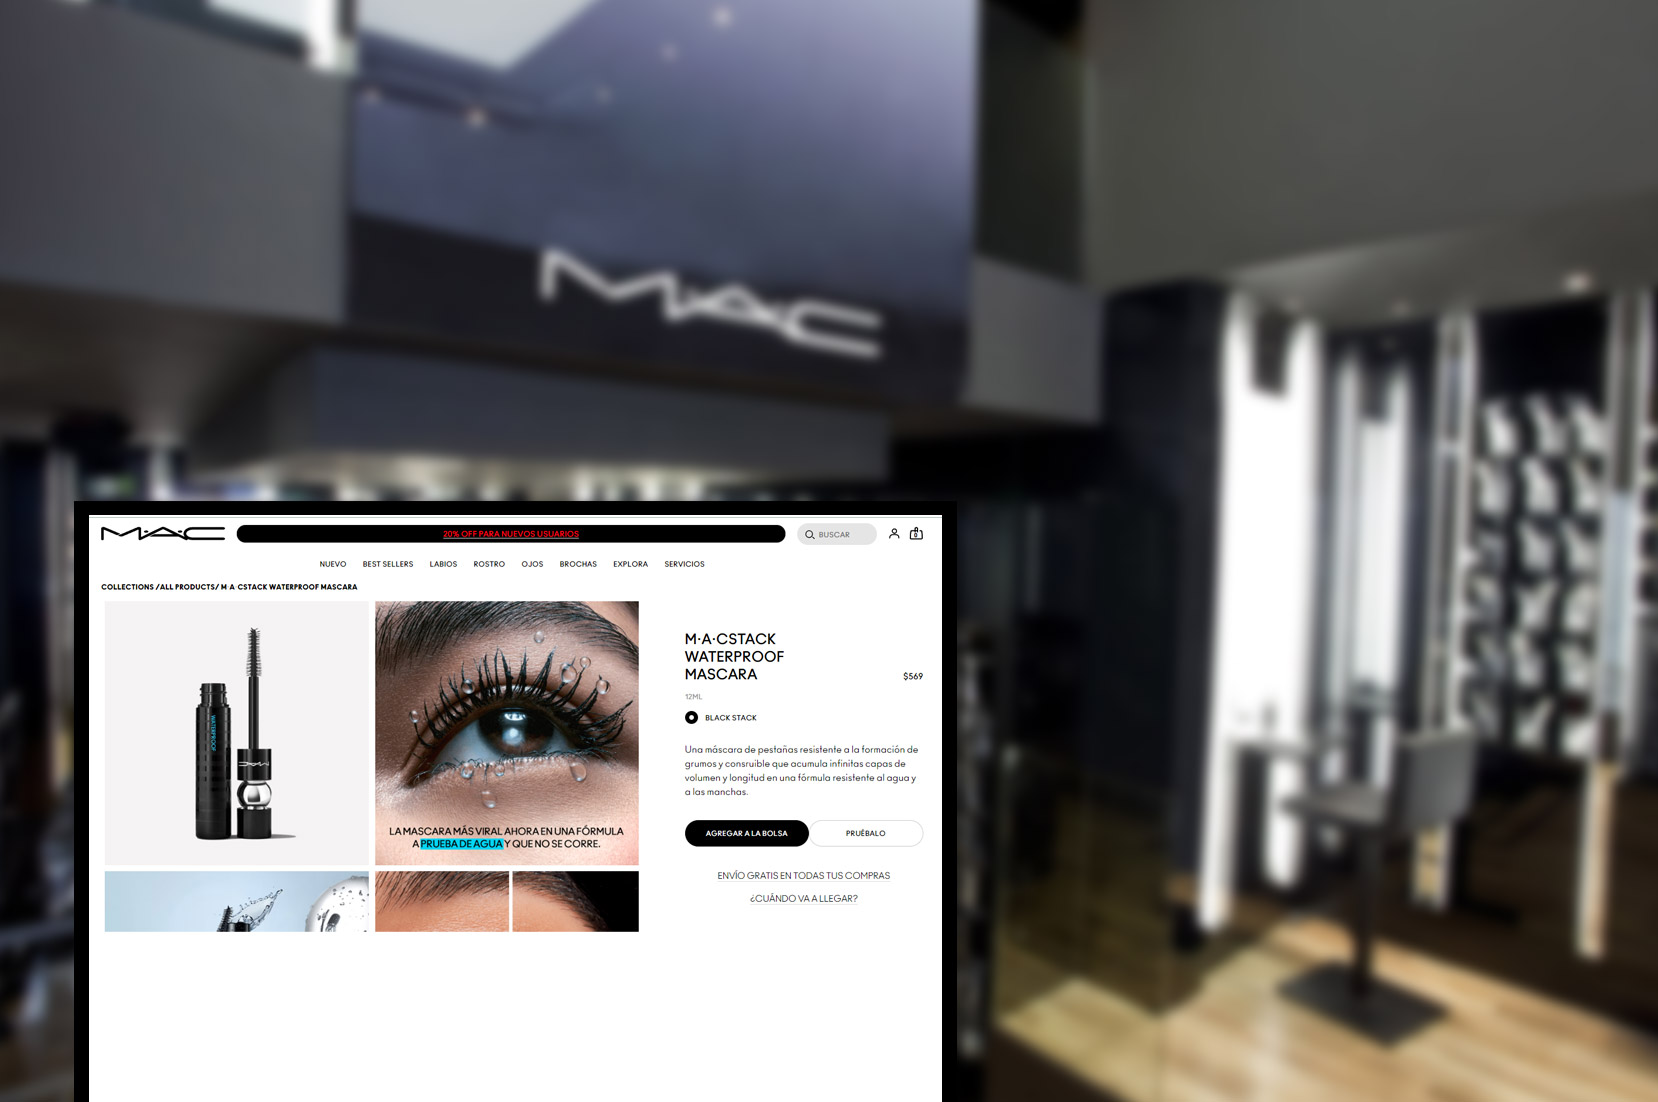 maccosmetics-comproduct-pricing-information-and-image-scraping-services